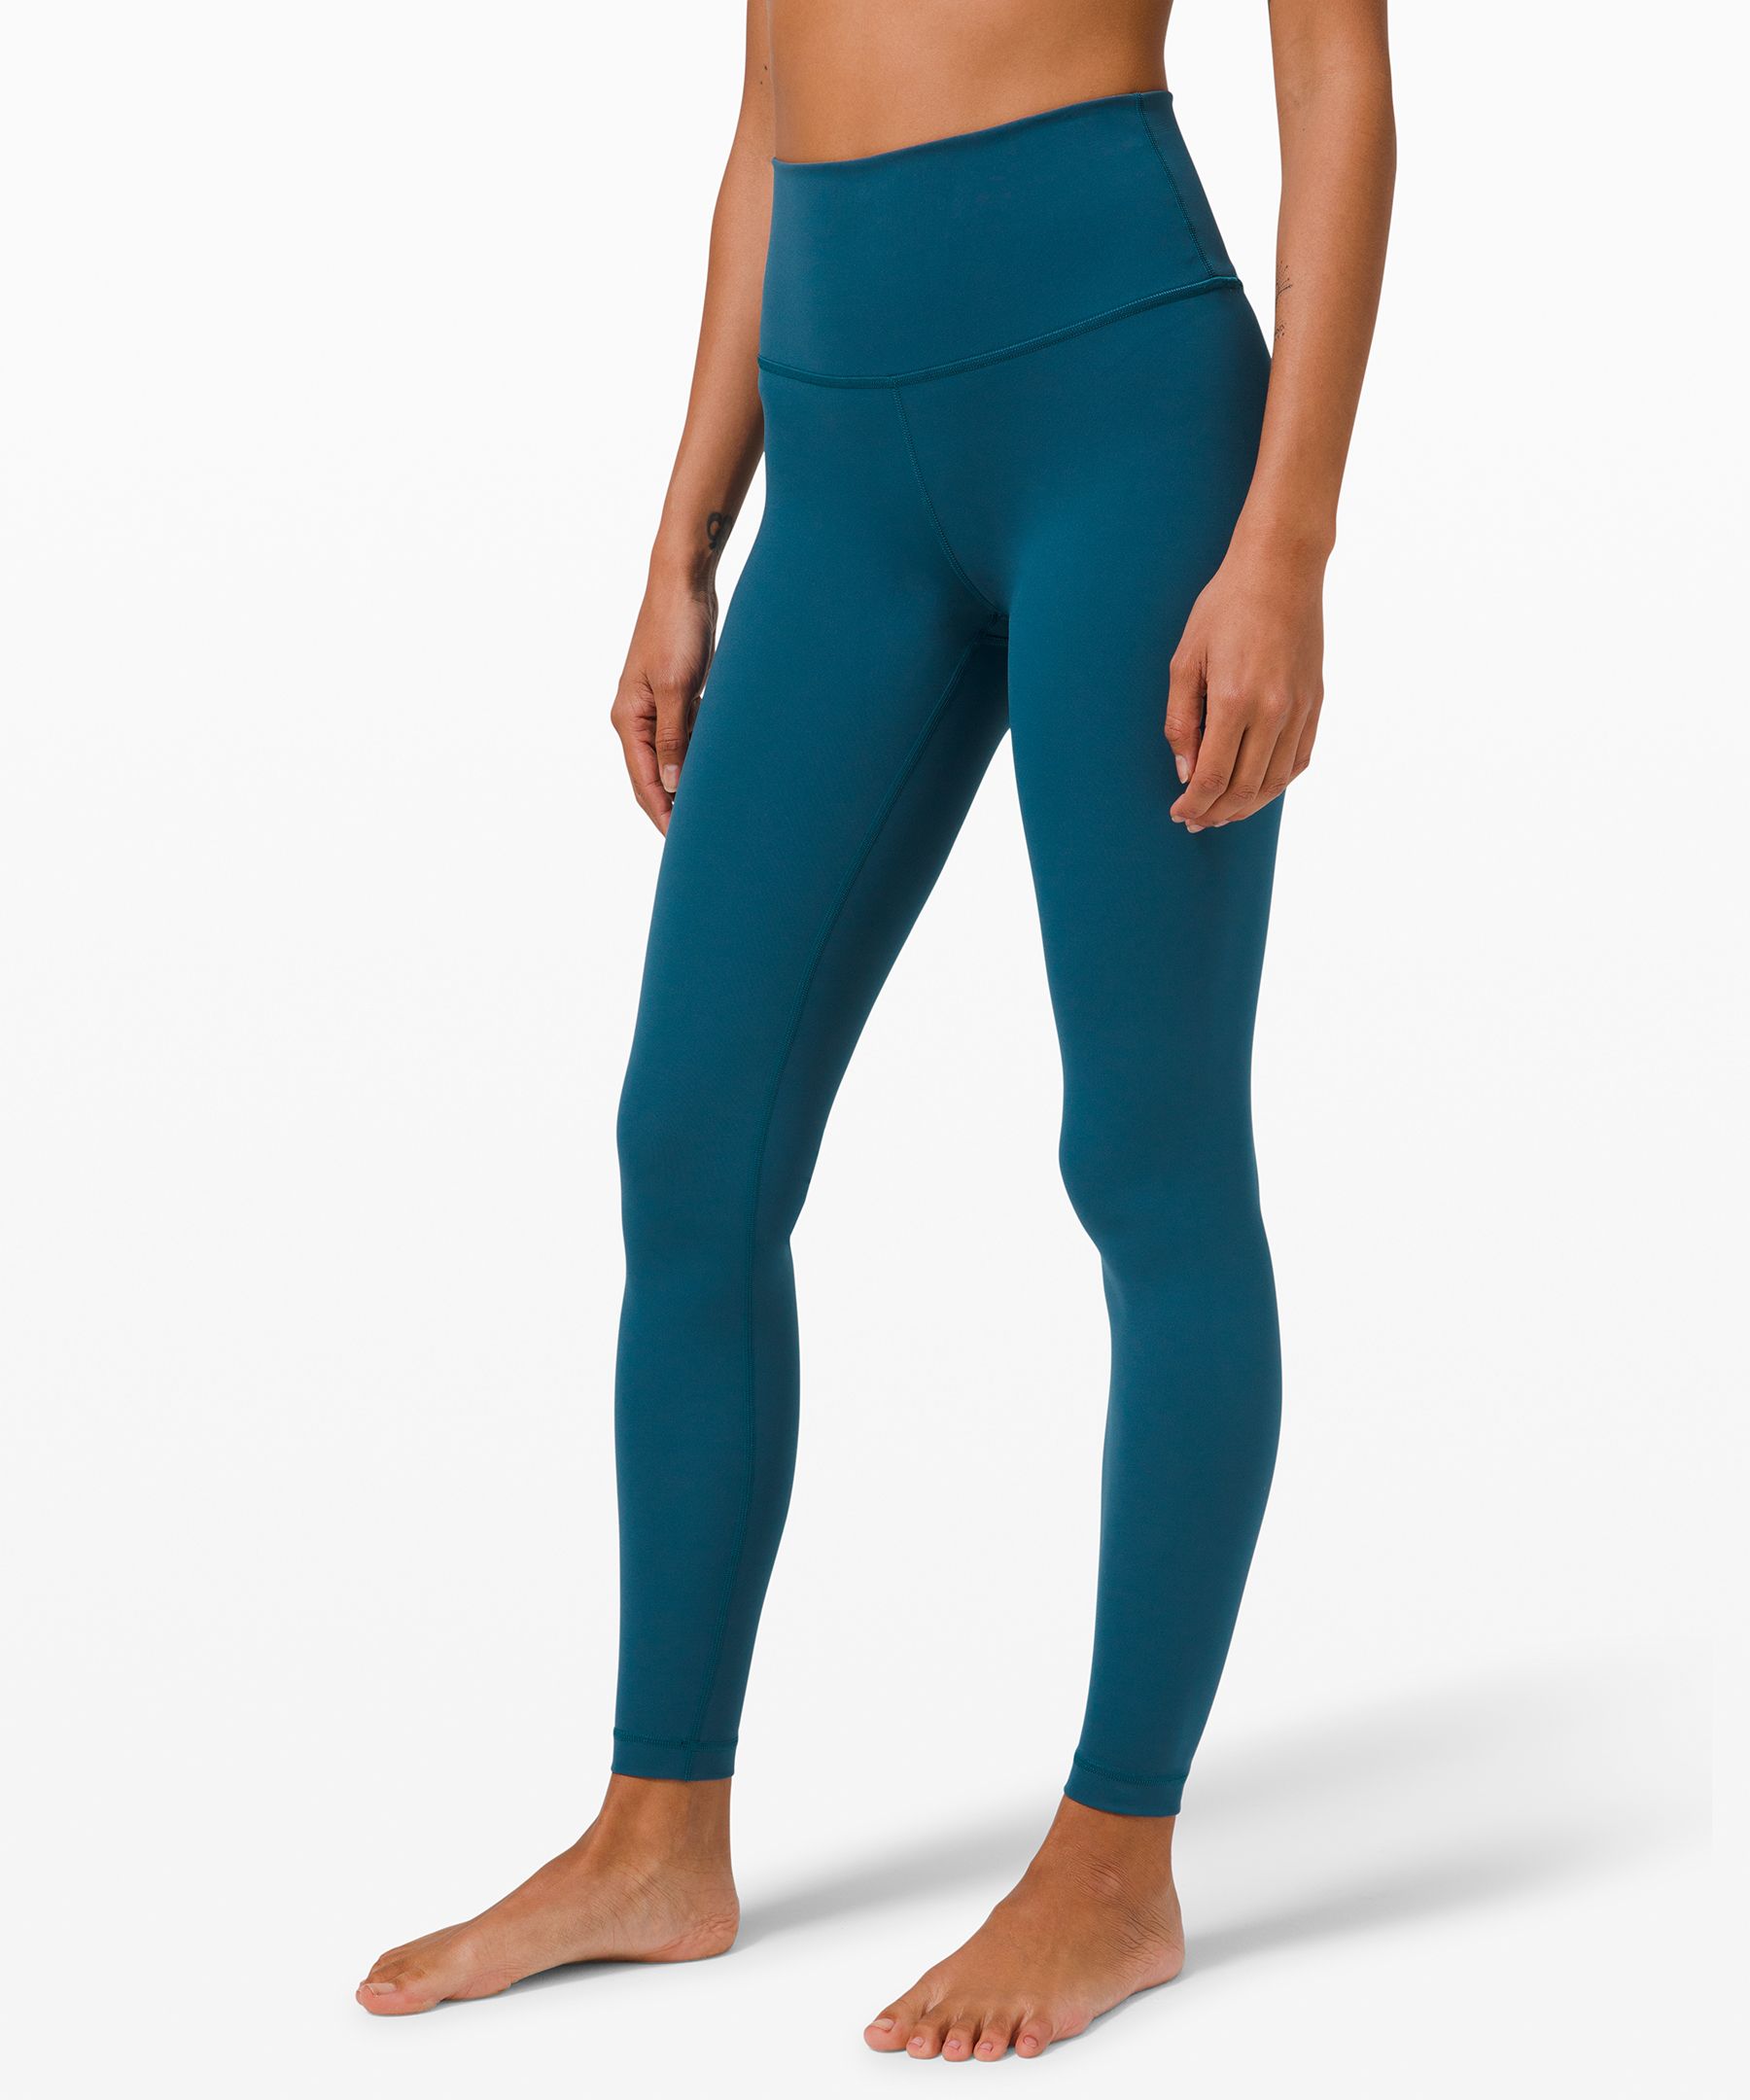 Lululemon Wunder Under High-Rise Tight 28 Shine Full-On Luxtreme Size 2  Black - $63 (35% Off Retail) - From Rebel